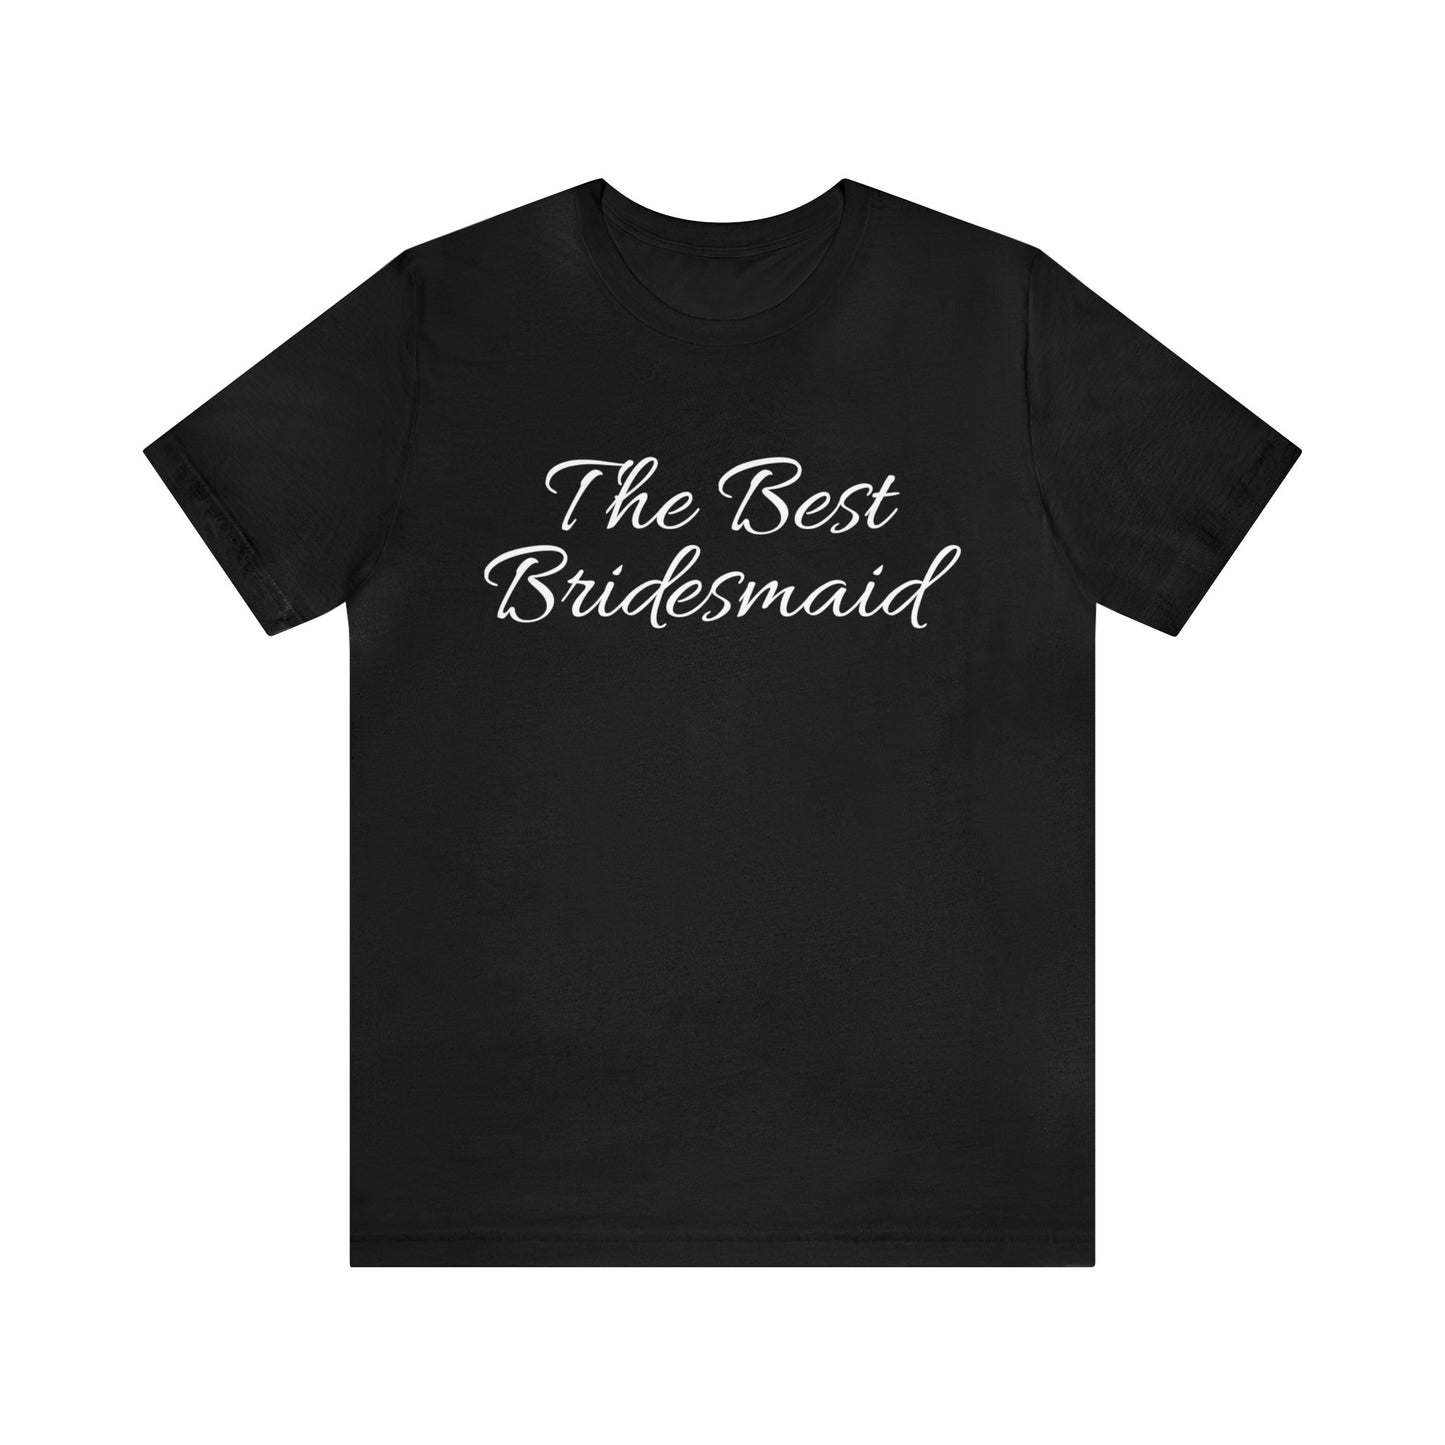 Bridal Support Bridesmaid Love Cotton Crew neck Customer Satisfaction Gratitude Expression Heartfelt Message Meaningful Tee Pre-Wedding Celebrations Quality Craftsmanship Special Bond Stylish Comfort T-shirts Thoughtful Gift Unforgettable Memories Unisex Wedding Day Apparel Wedding Party Apparel Wedding Party Pride